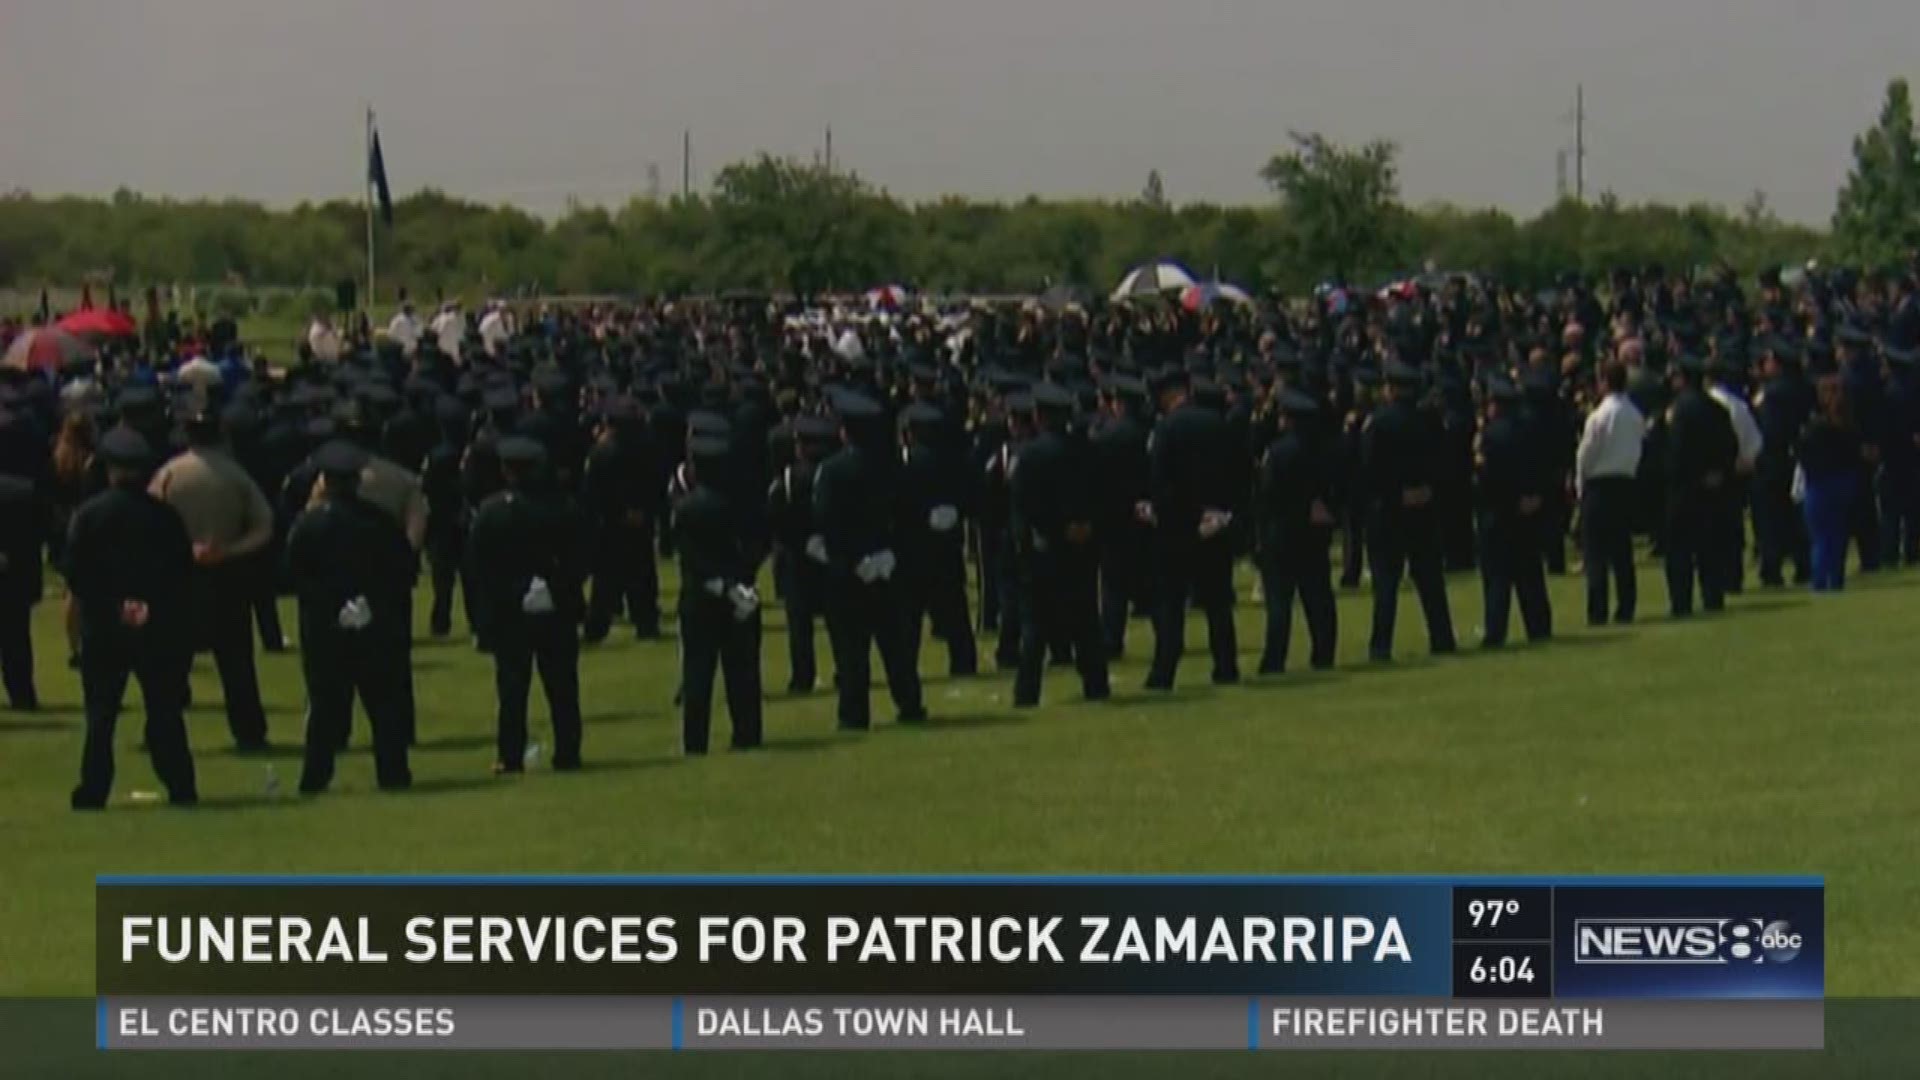 Todd Unger reports - Funeral Services for Patrick Zamarripa